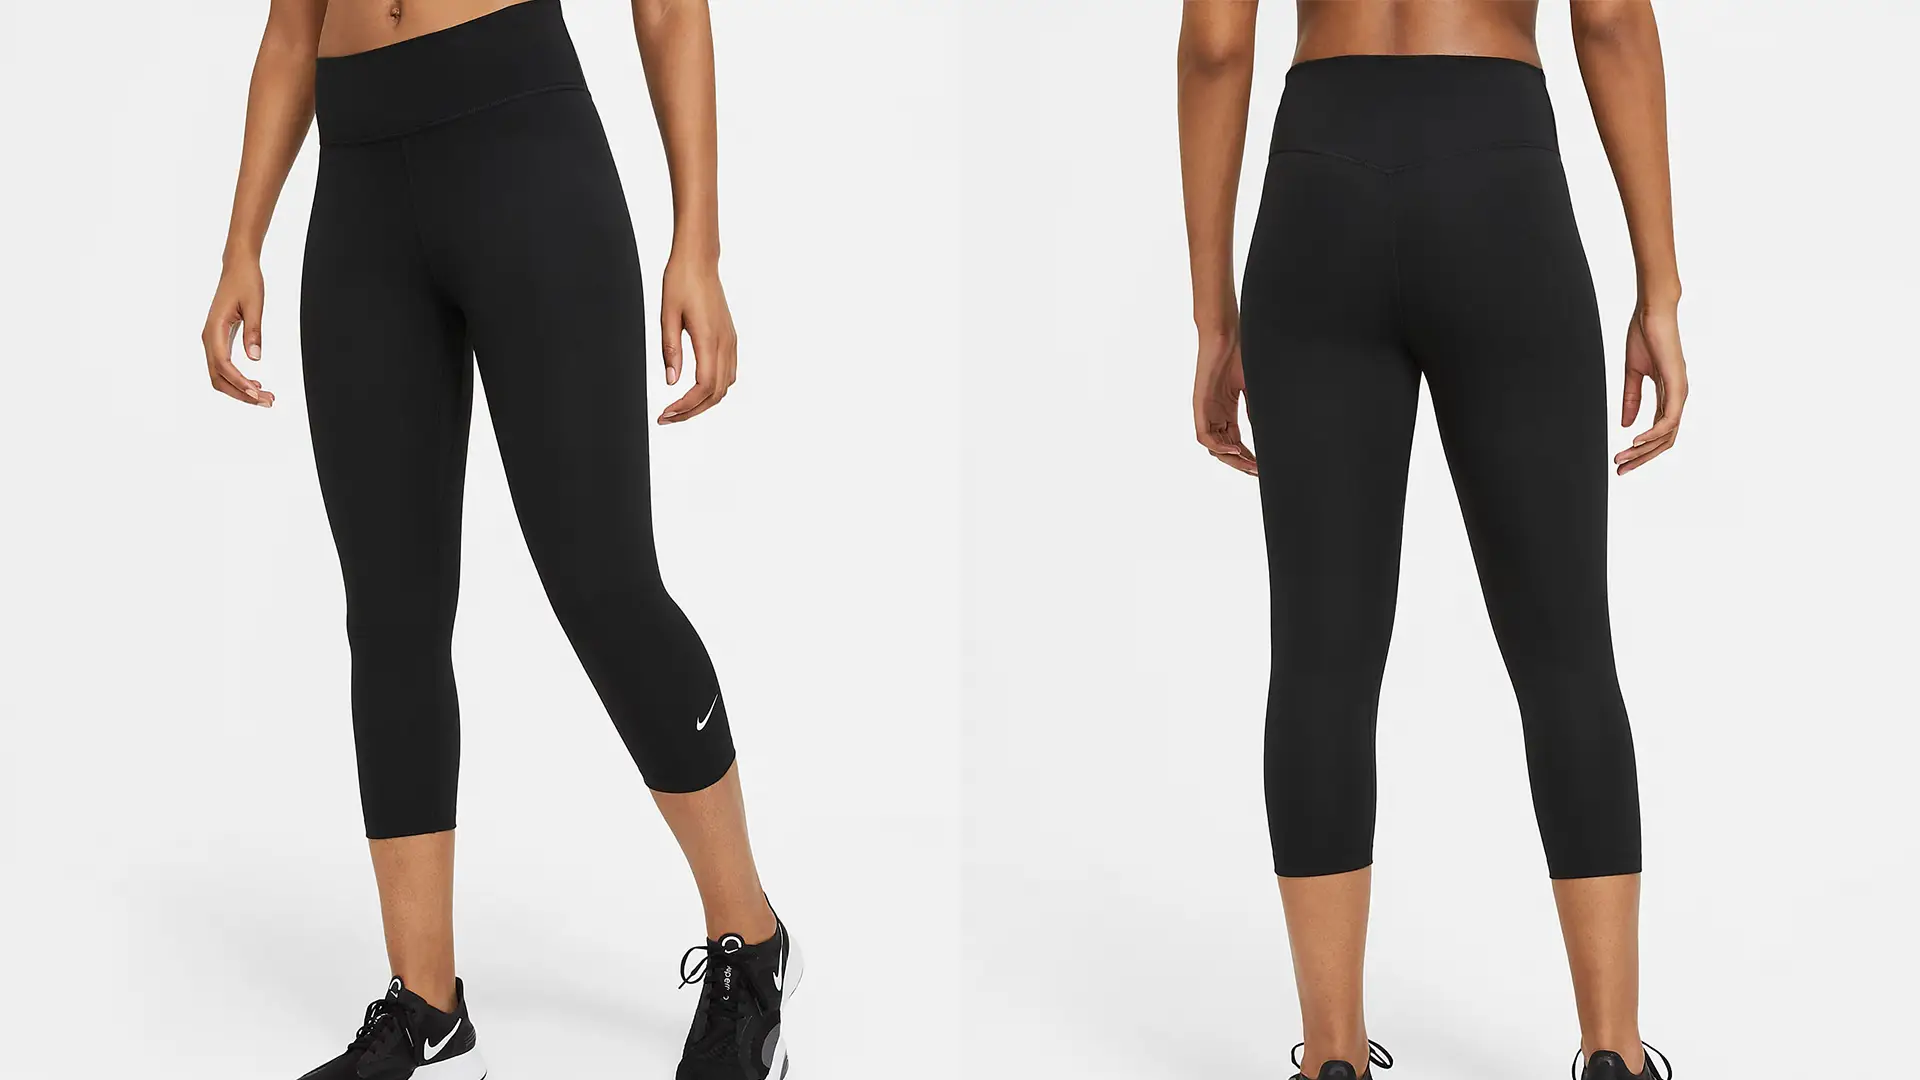 ASOS 4505 rest day legging with zip flare